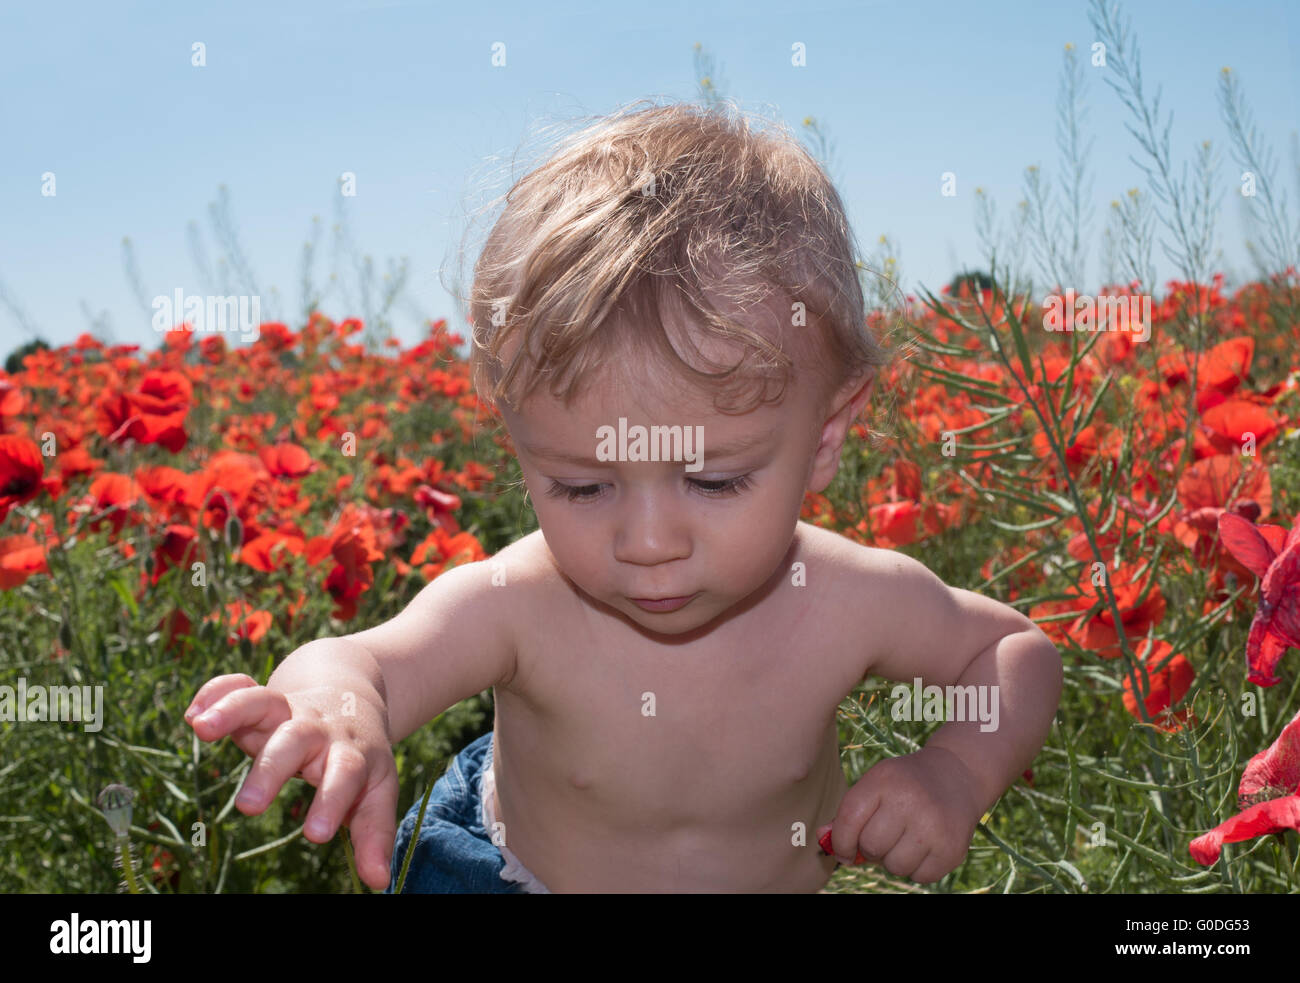 Cute White Baby Playing with Flowers at the Garden Stock Photo